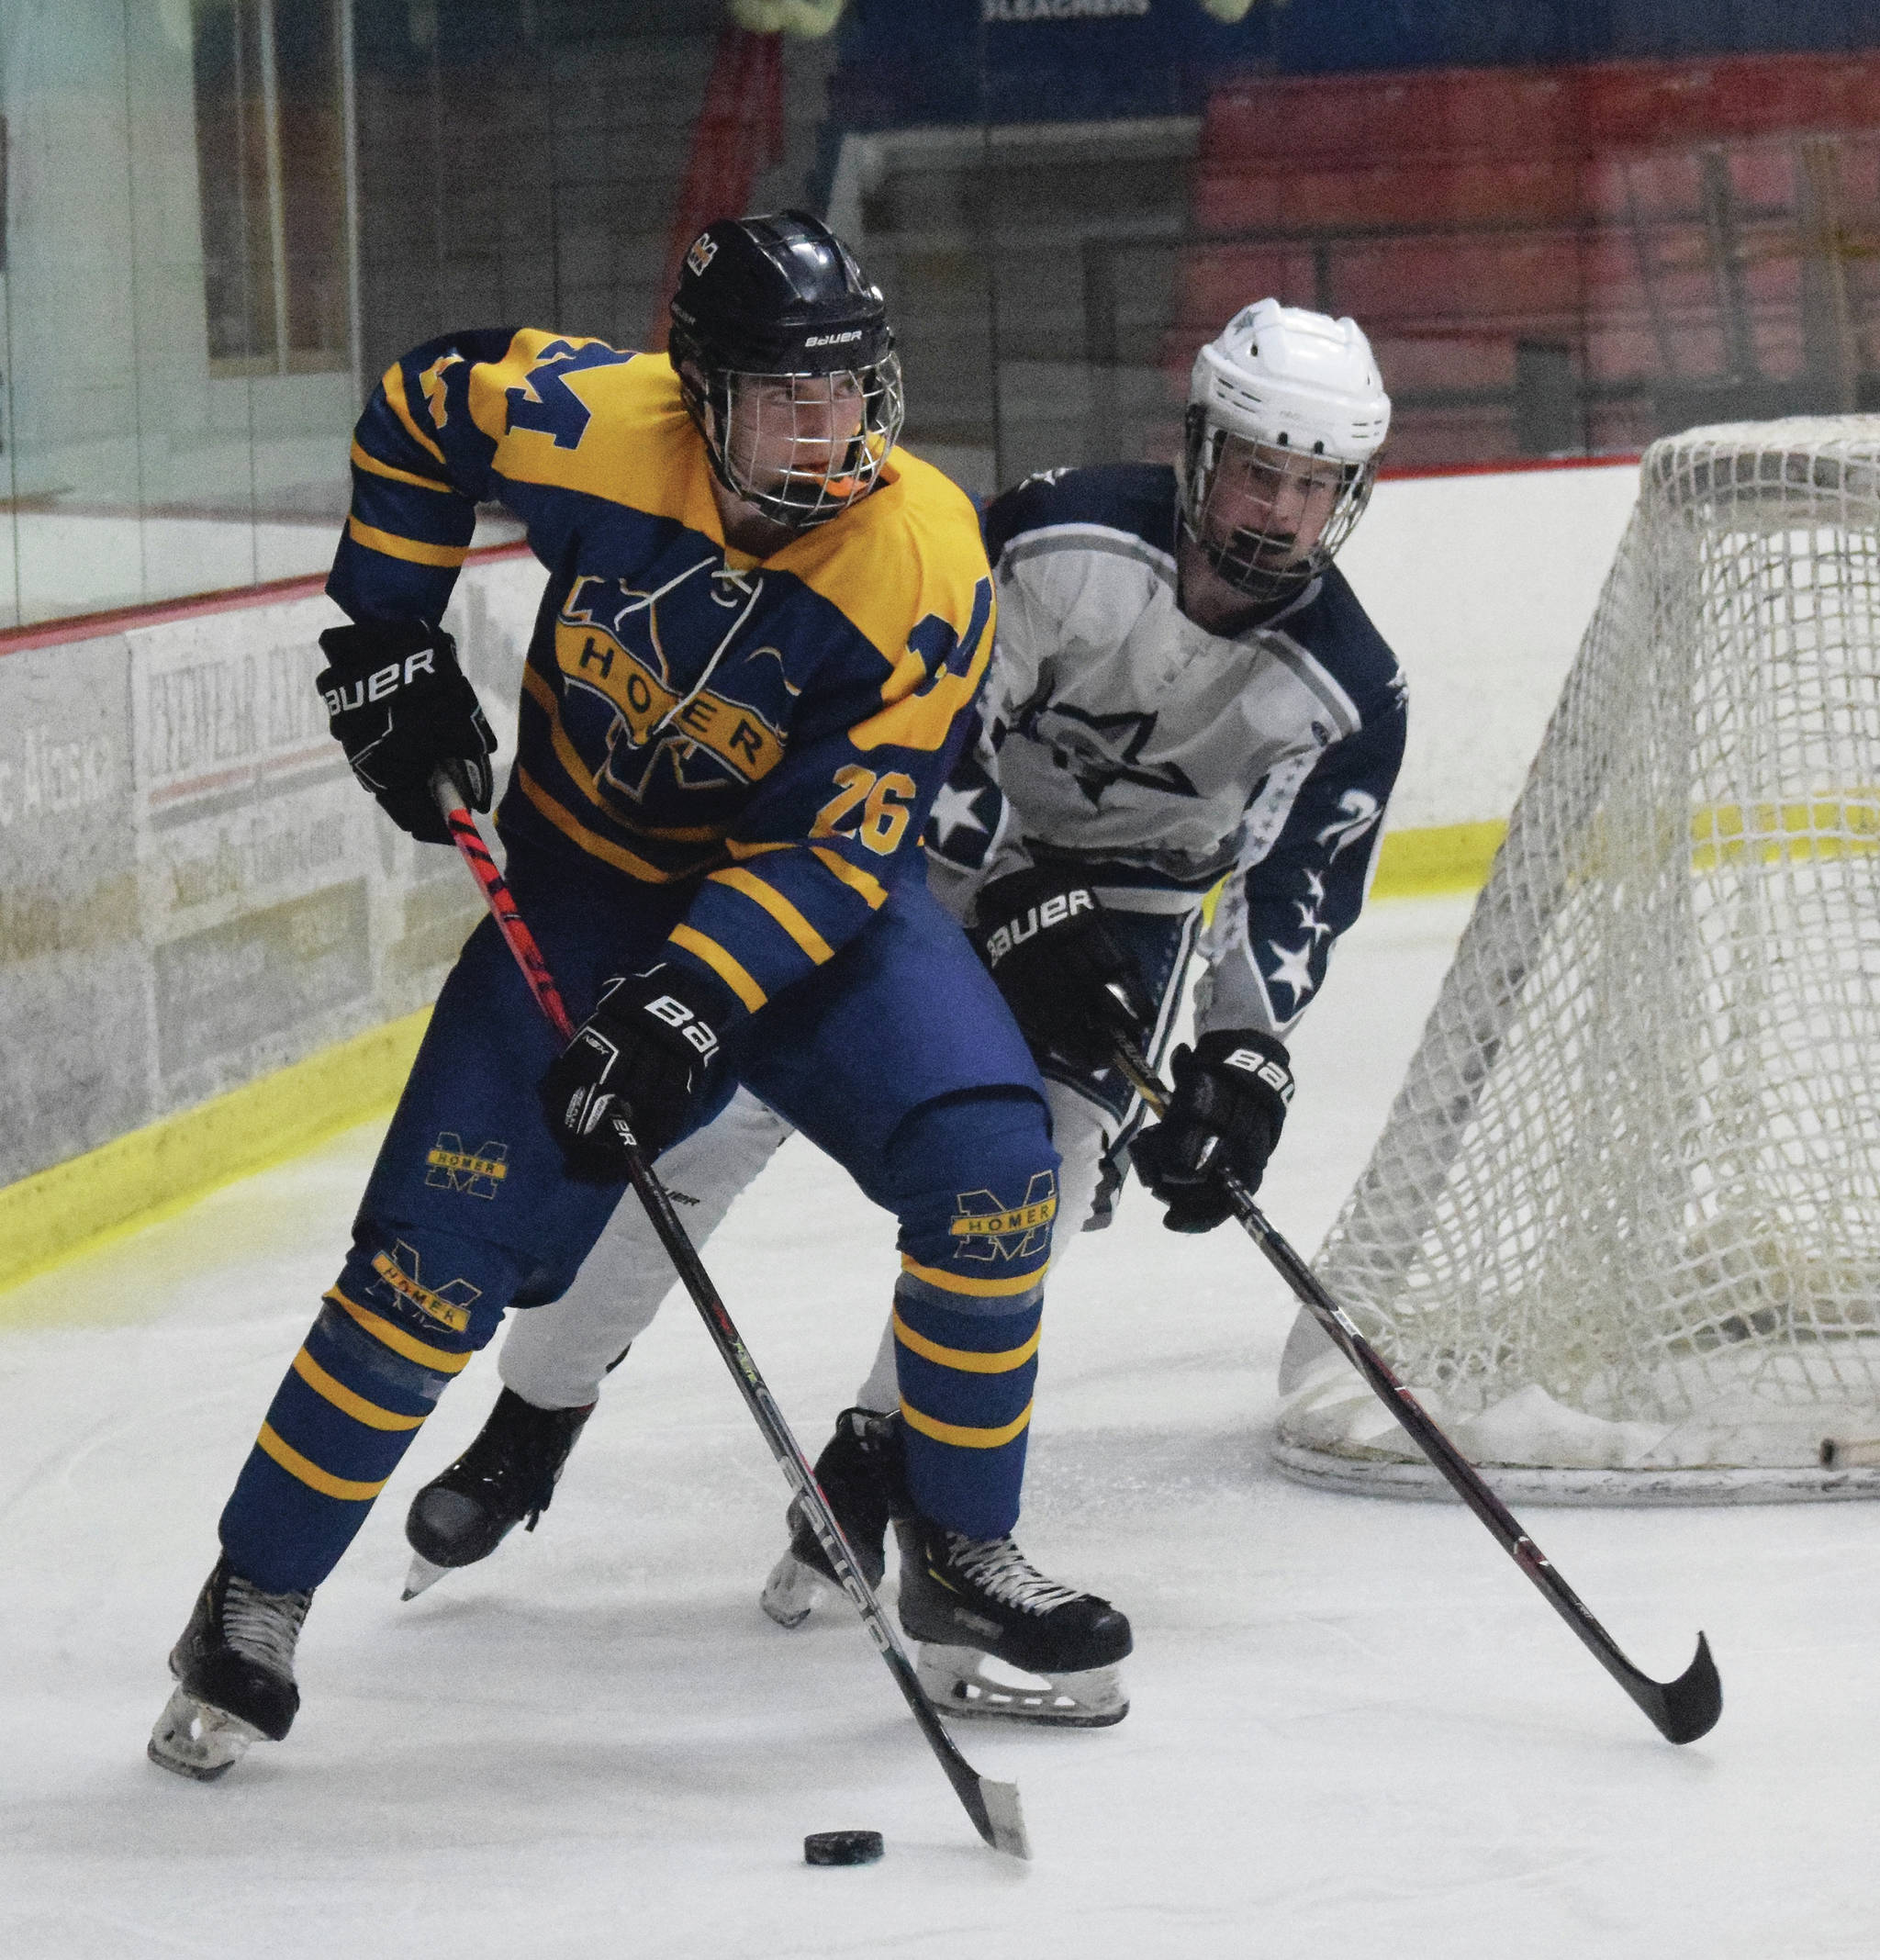 Soldotna’s Dylan Dahlgren chases Homer’s Ethan Pitzman around the back of the goal Friday at the Soldotna Regional Sports Complex in Soldotna, Alaska. (Photo by Joey Klecka/Peninsula Clarion)